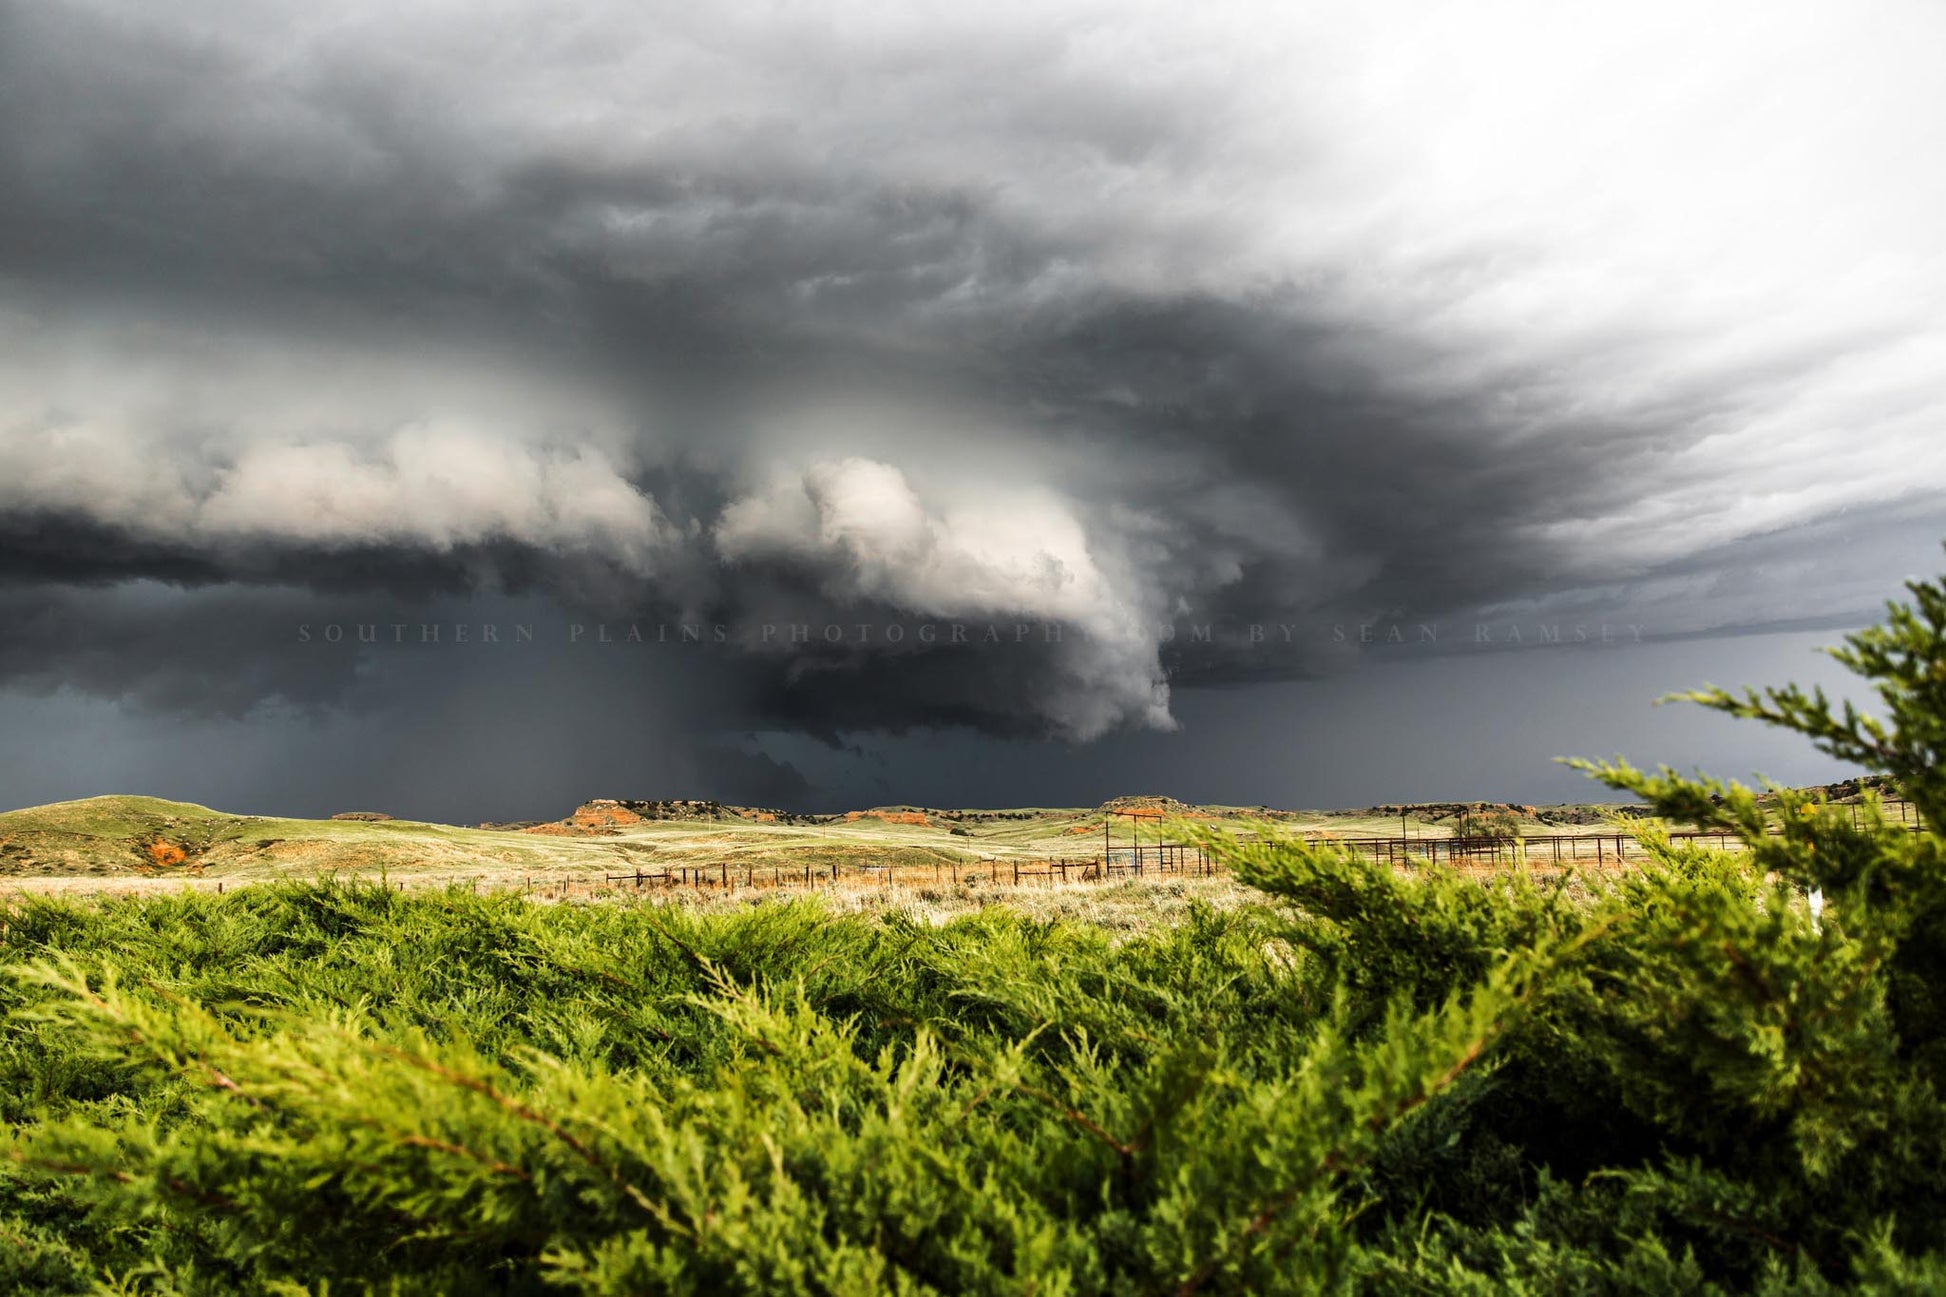 Storm photography print of a supercell thunderstorm advancing over cedar bushes on a stormy spring day on the Nebraska prairie by Sean Ramsey of Southern Plains Photography.